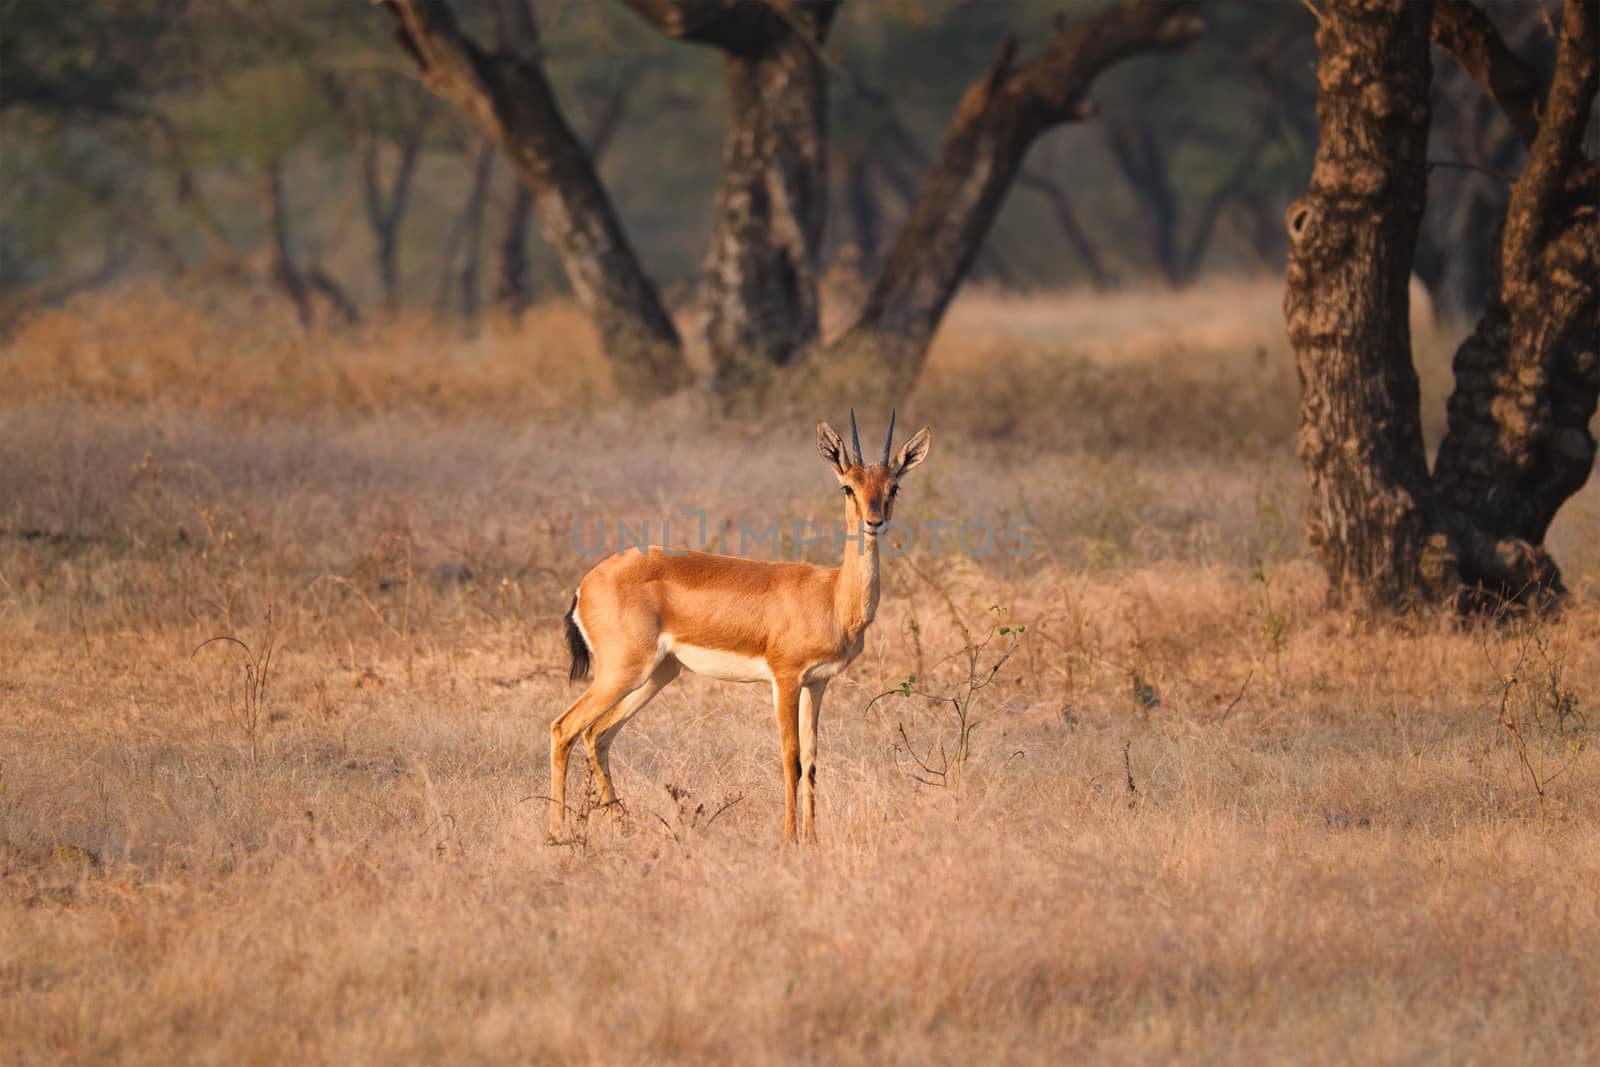 Indian bennetti gazelle or chinkara in Rathnambore National Park, Rajasthan, India by dimol